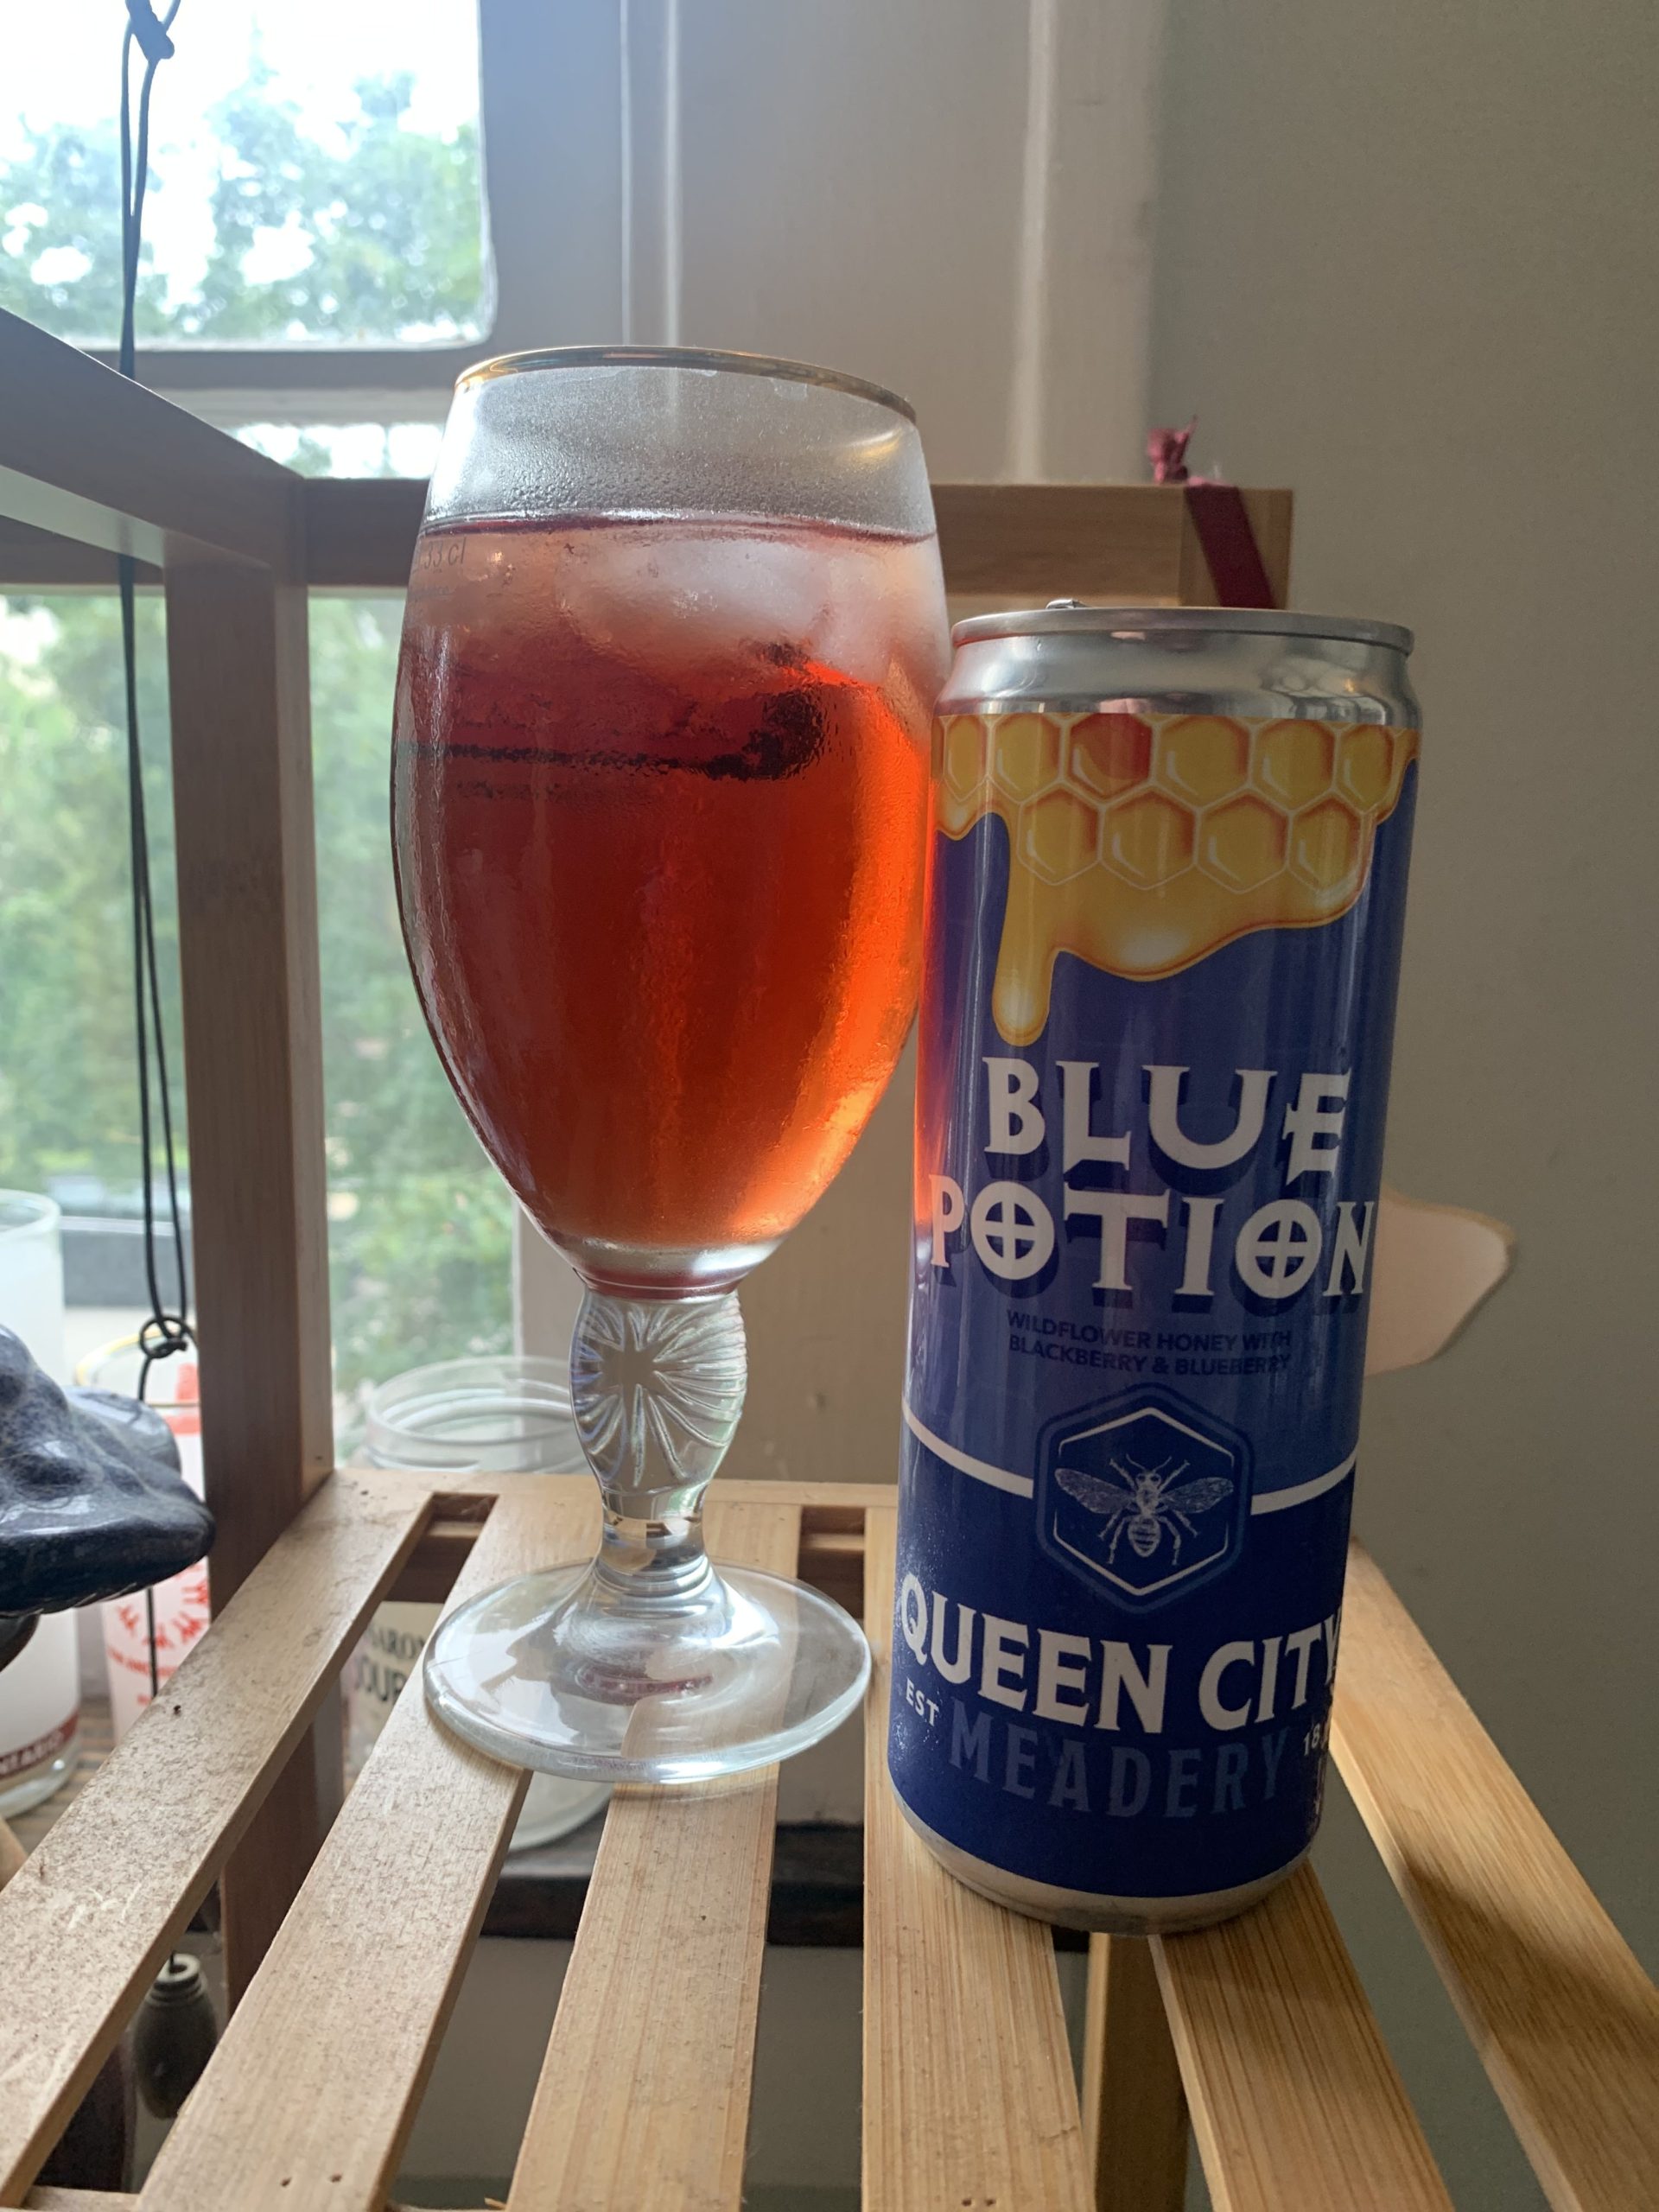 Brews in the Buff : Blue Potion by Queen City Meadery